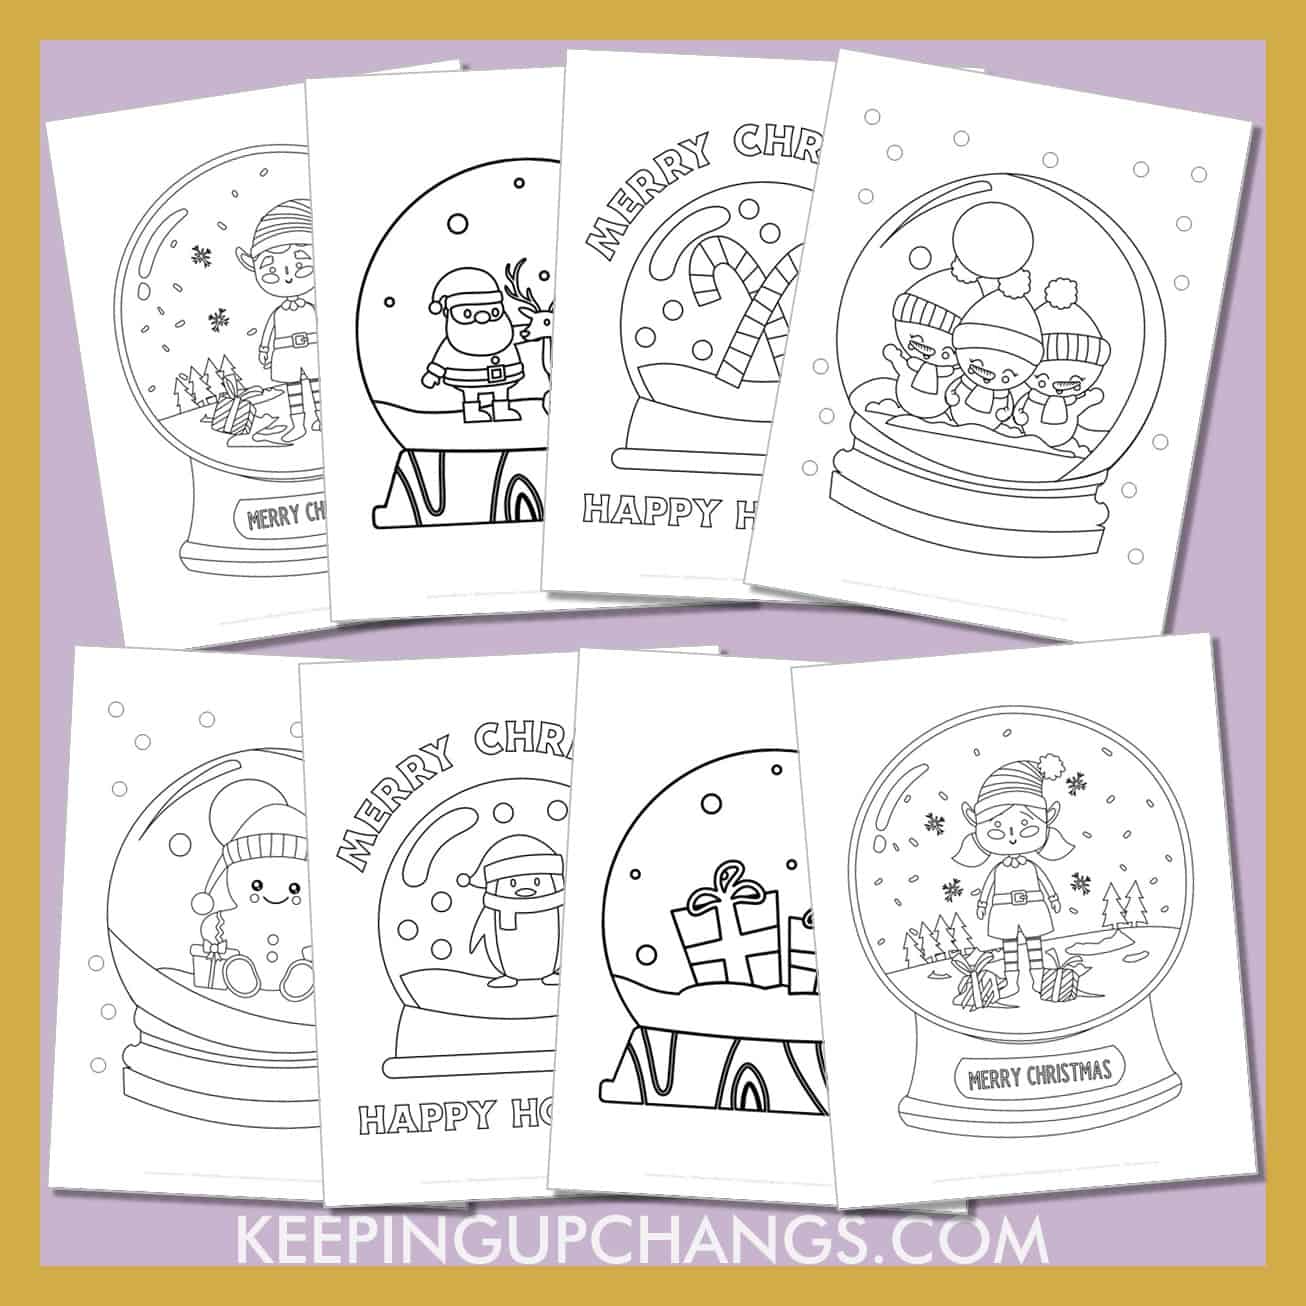 snow globe colouring sheets including blank template, santa claus, reindeer, penguin, snowman, gingerbread, and more.